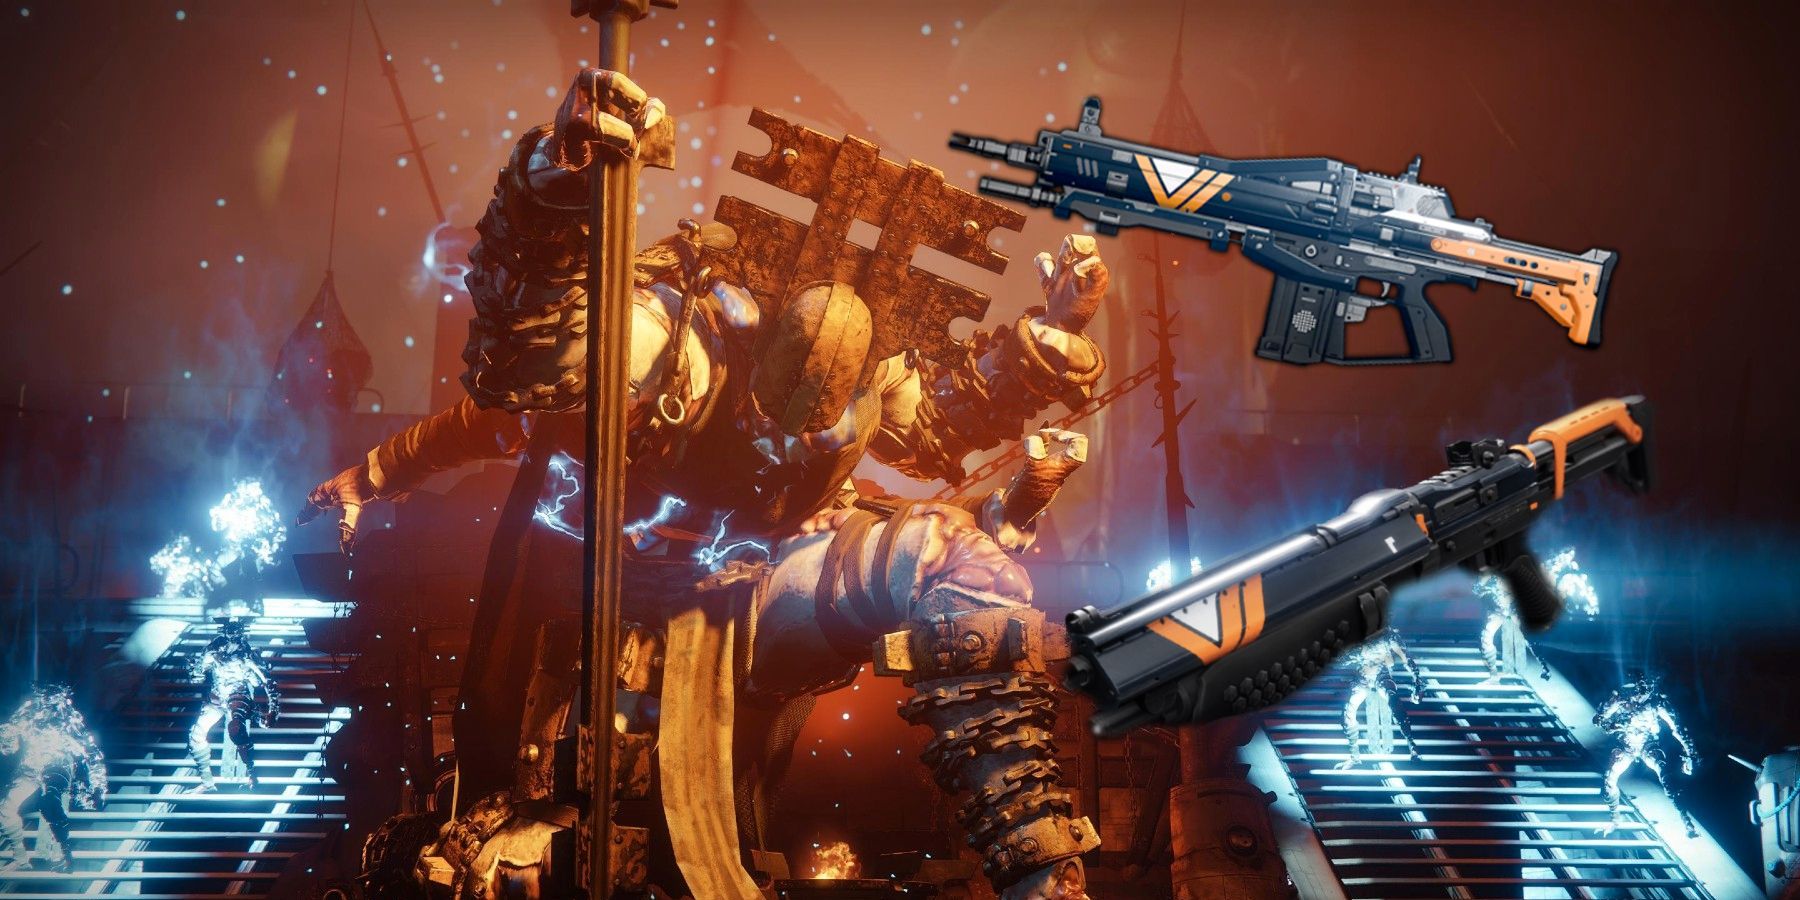 destiny 2 brings back the hollowed lair nightfall one more time before witch queen release